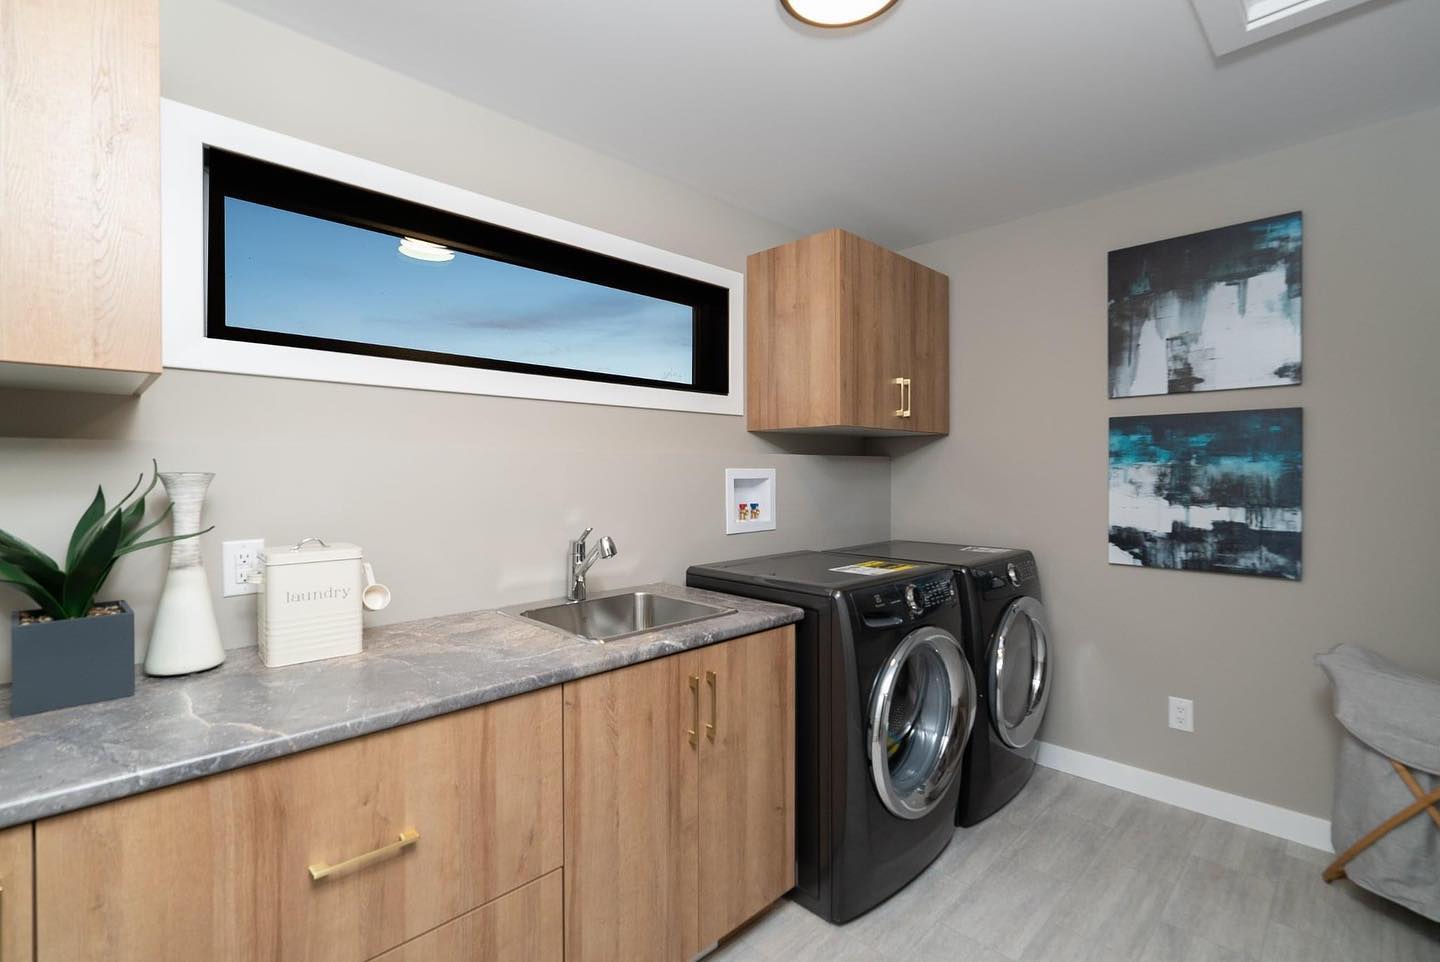 The laundry room is a space that needs to serve the most functionality - plenty of counterspace, drawers/cabinets, and a sink are at the top of the list. 
As a bonus, our Santa Cruz model includes a window to offer you some daylight while you fold your laundry (the least favourite household task!)